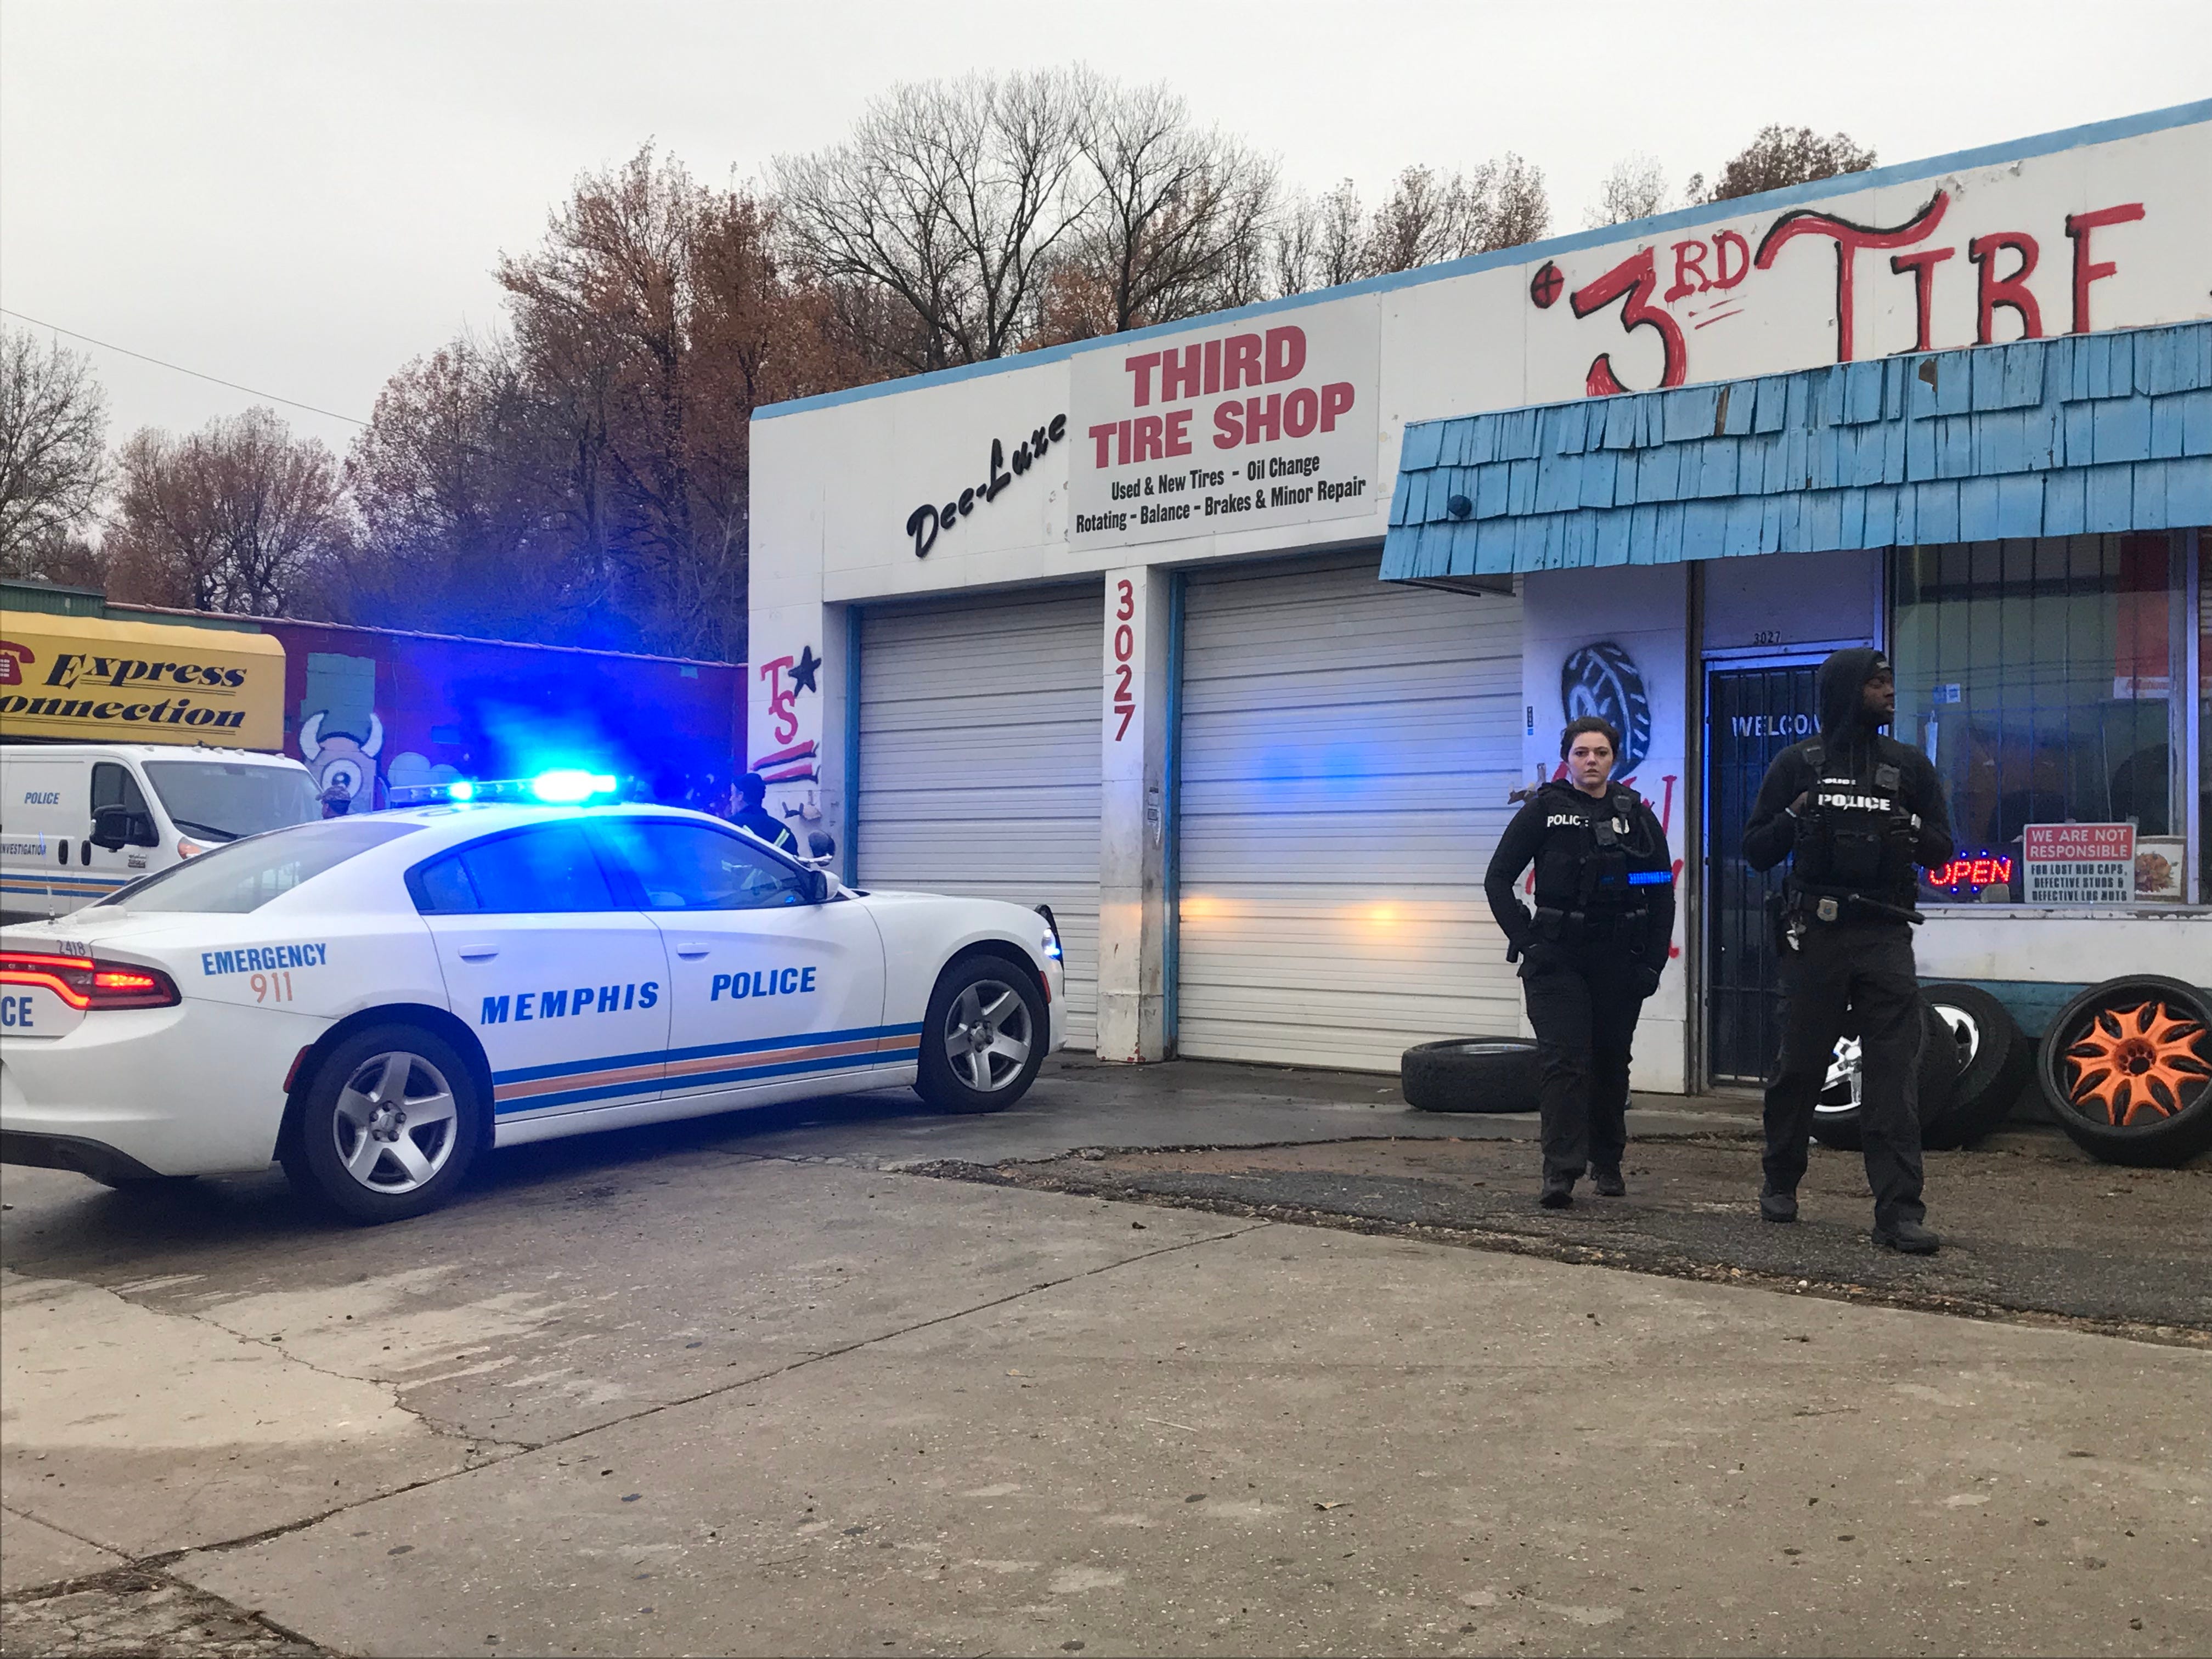 Third Tire Shop Shooting Owner Employee Killed In Southwest Memphis